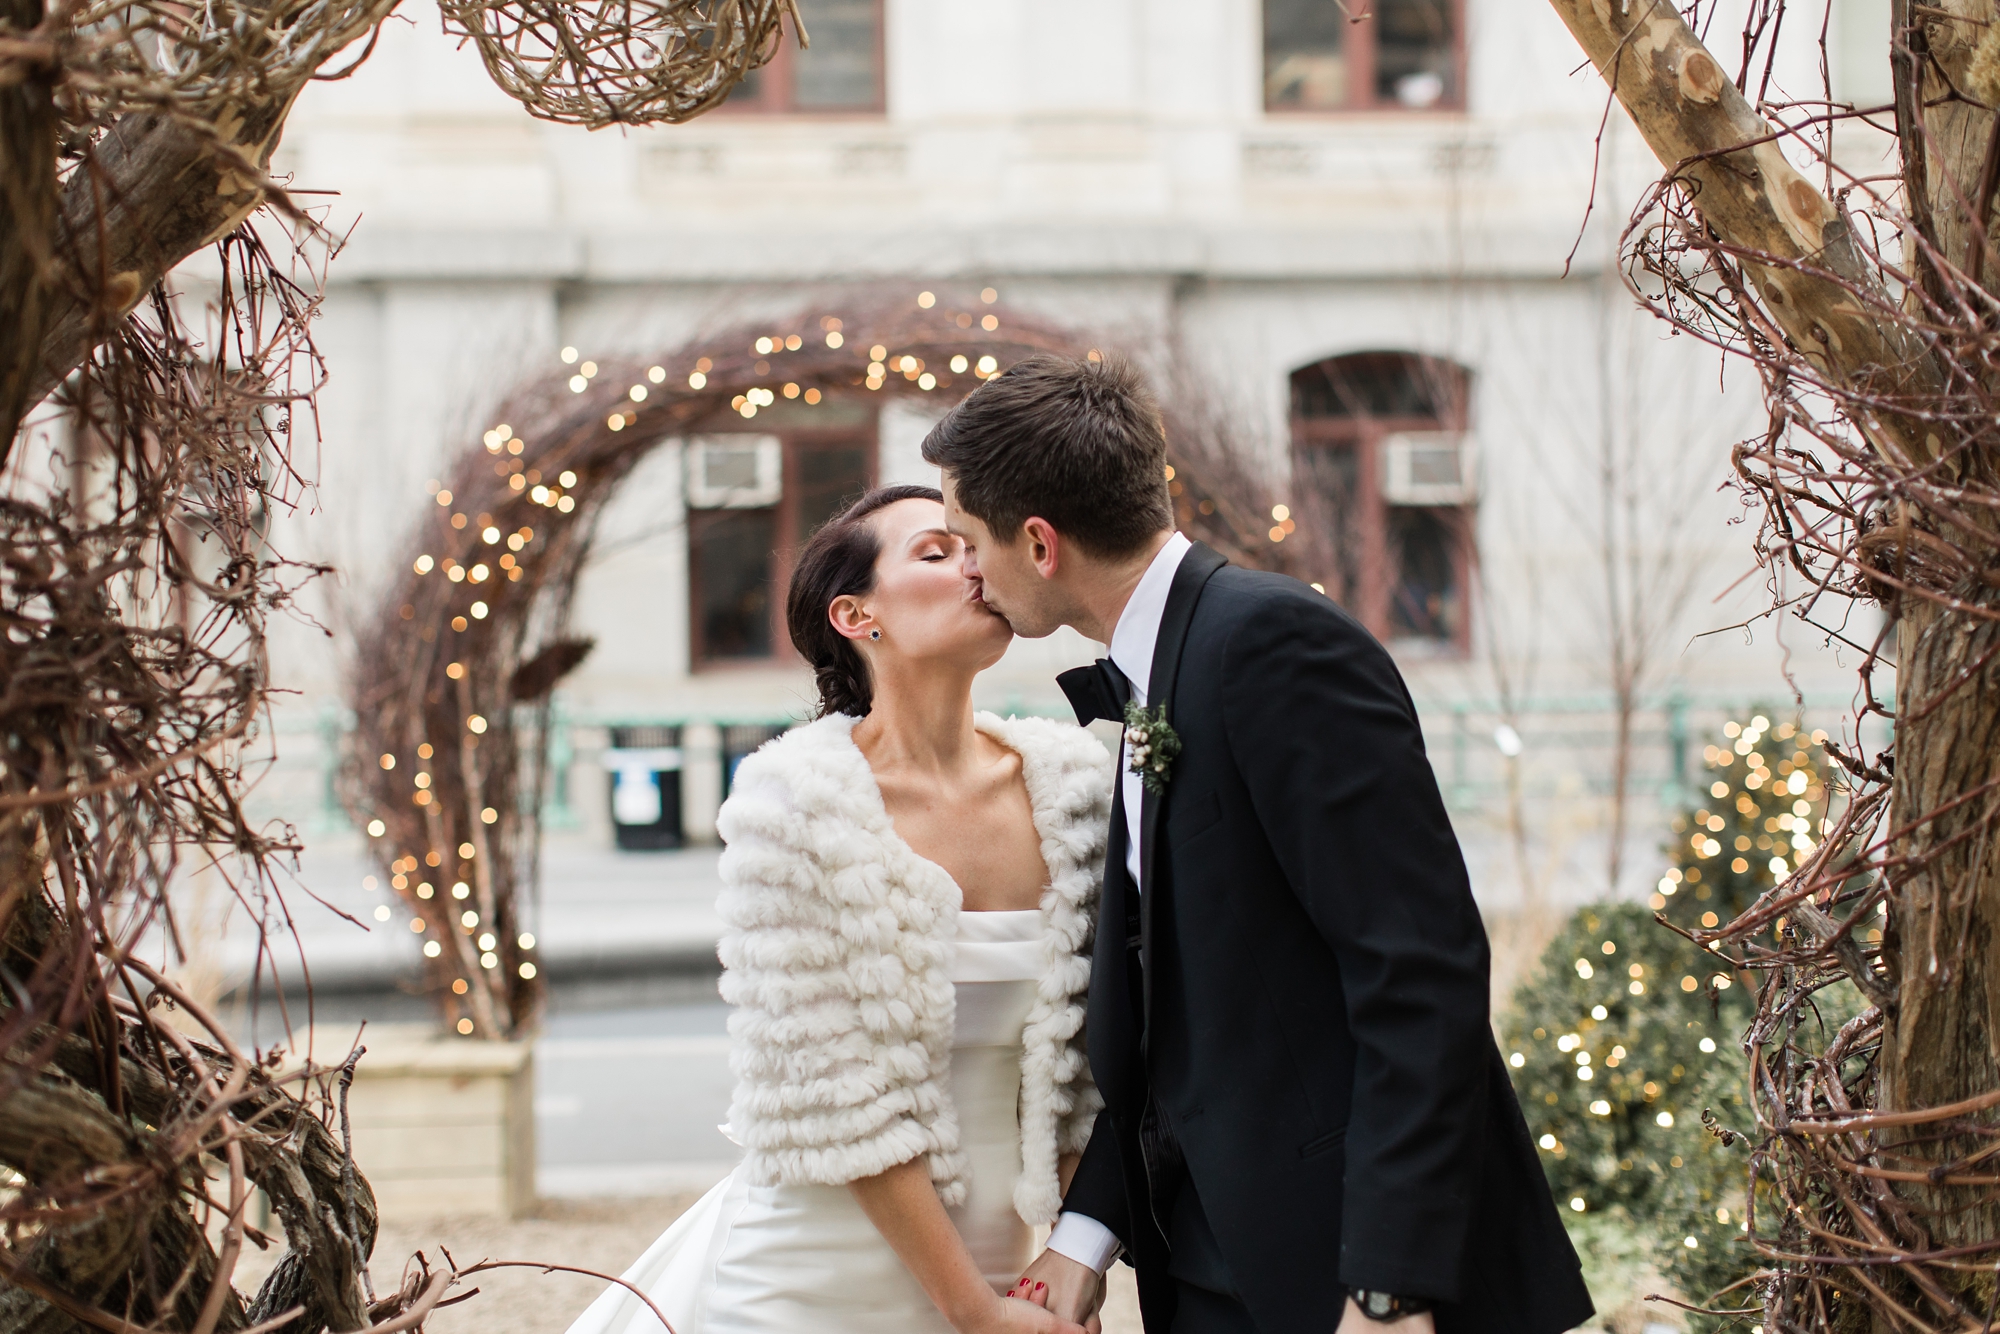 Philadelphia Center City Wedding Preview | Cathedral Basilica of SS Peter and Paul and Crystal Tea Room Wedding | Nan and Dan